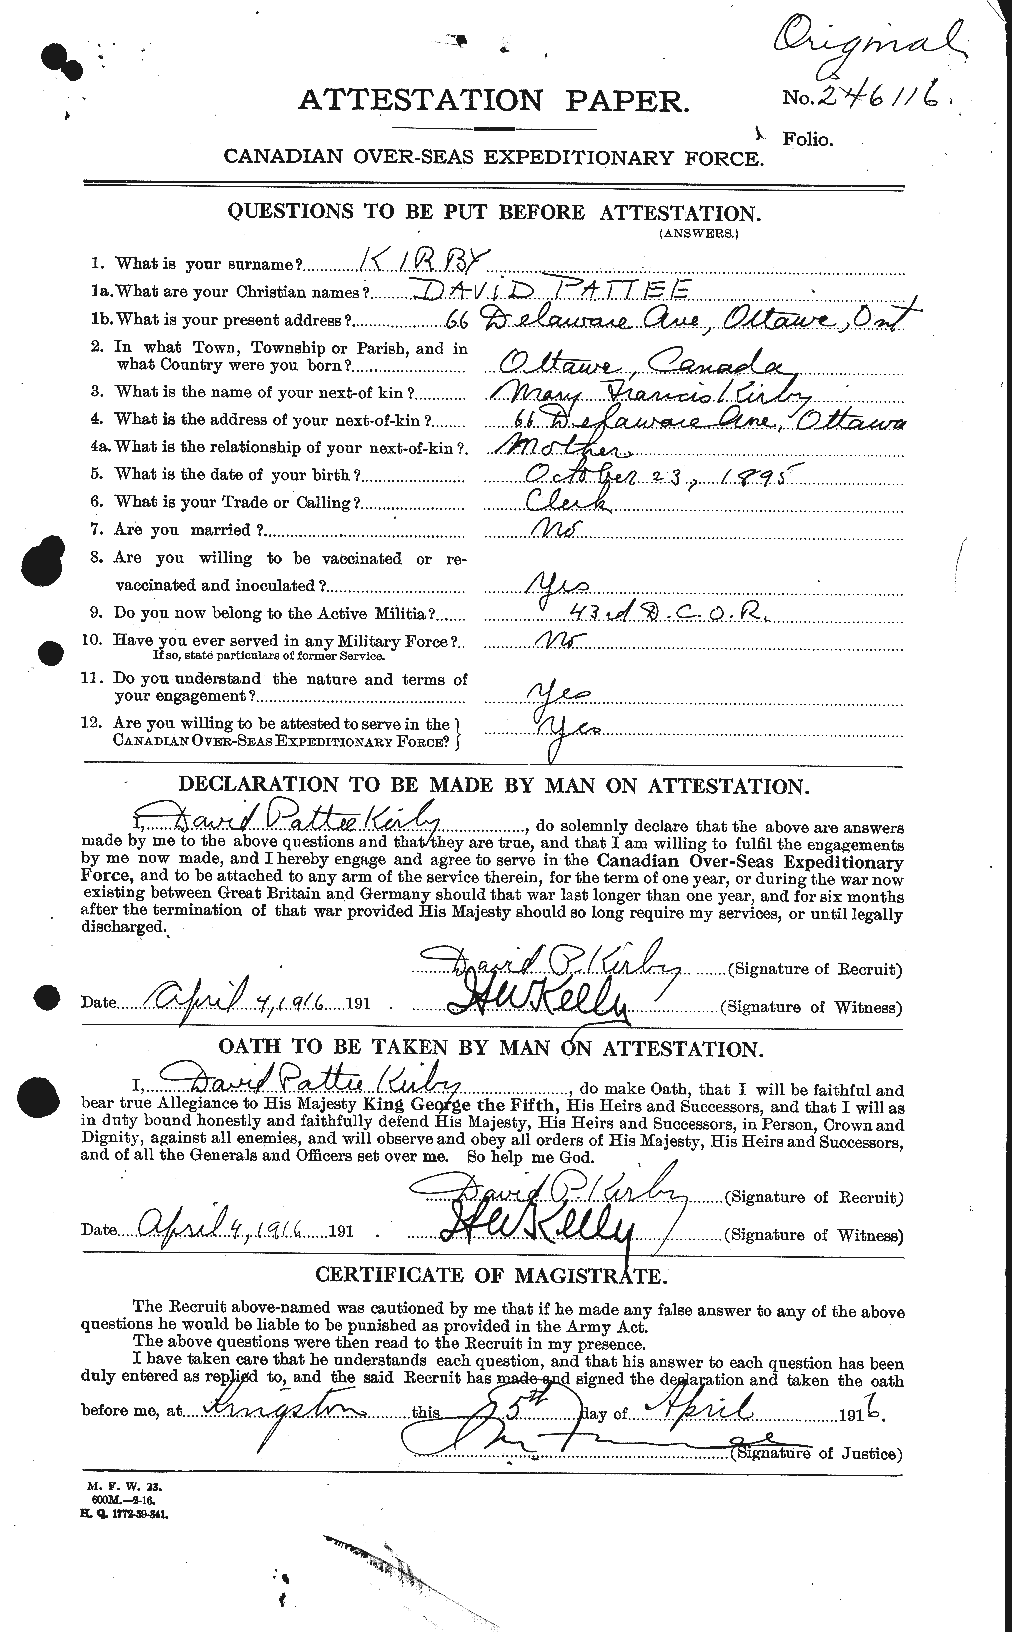 Personnel Records of the First World War - CEF 437173a